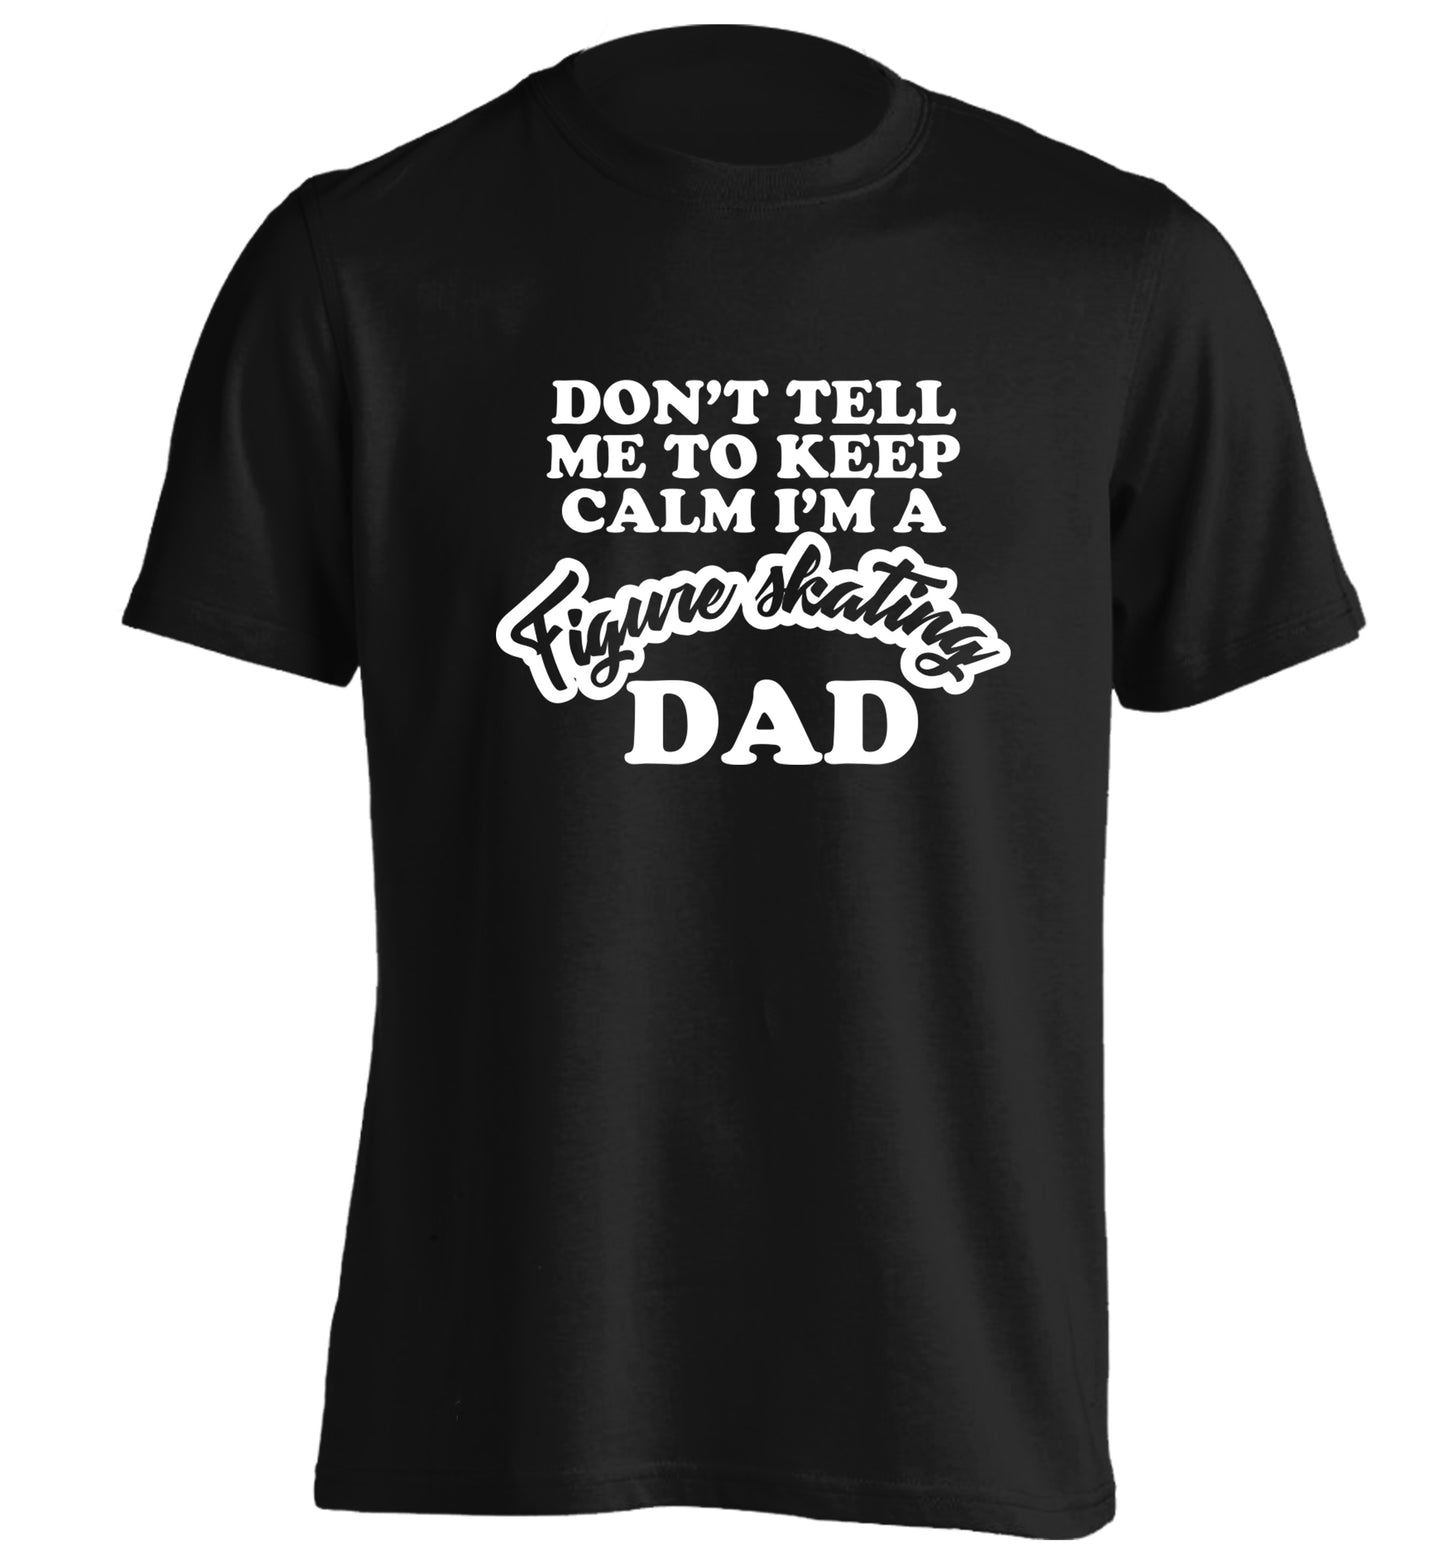 Don't tell me to keep calm I'm a figure skating dad adults unisexblack Tshirt 2XL